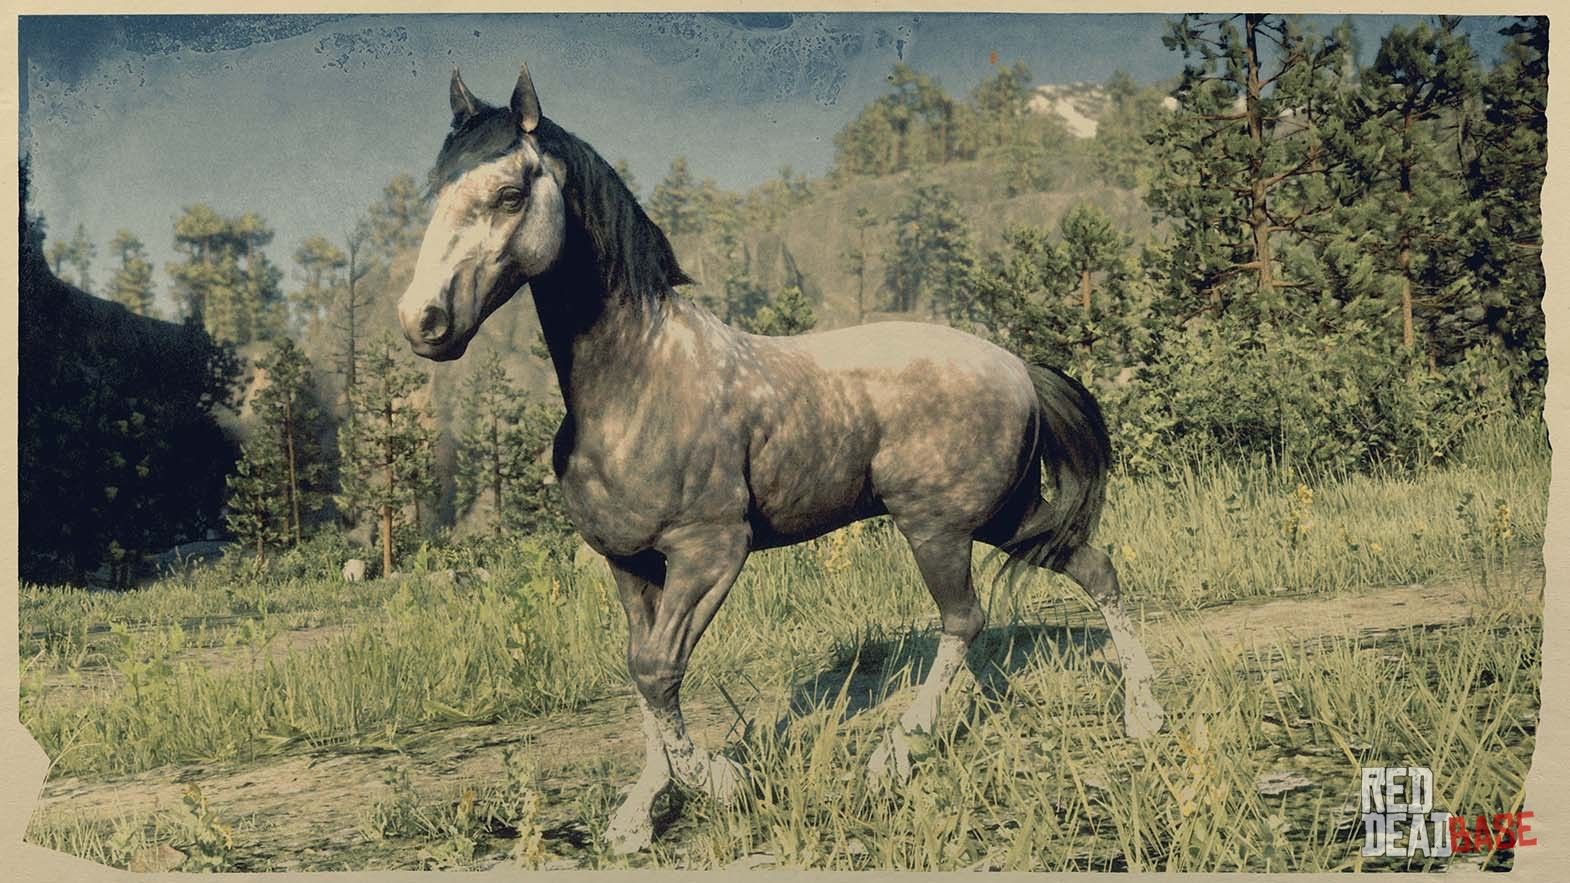 Rose Grey Andalusian Horse & Red Dead Online Horses Database & Statistics Dead Redemption 2